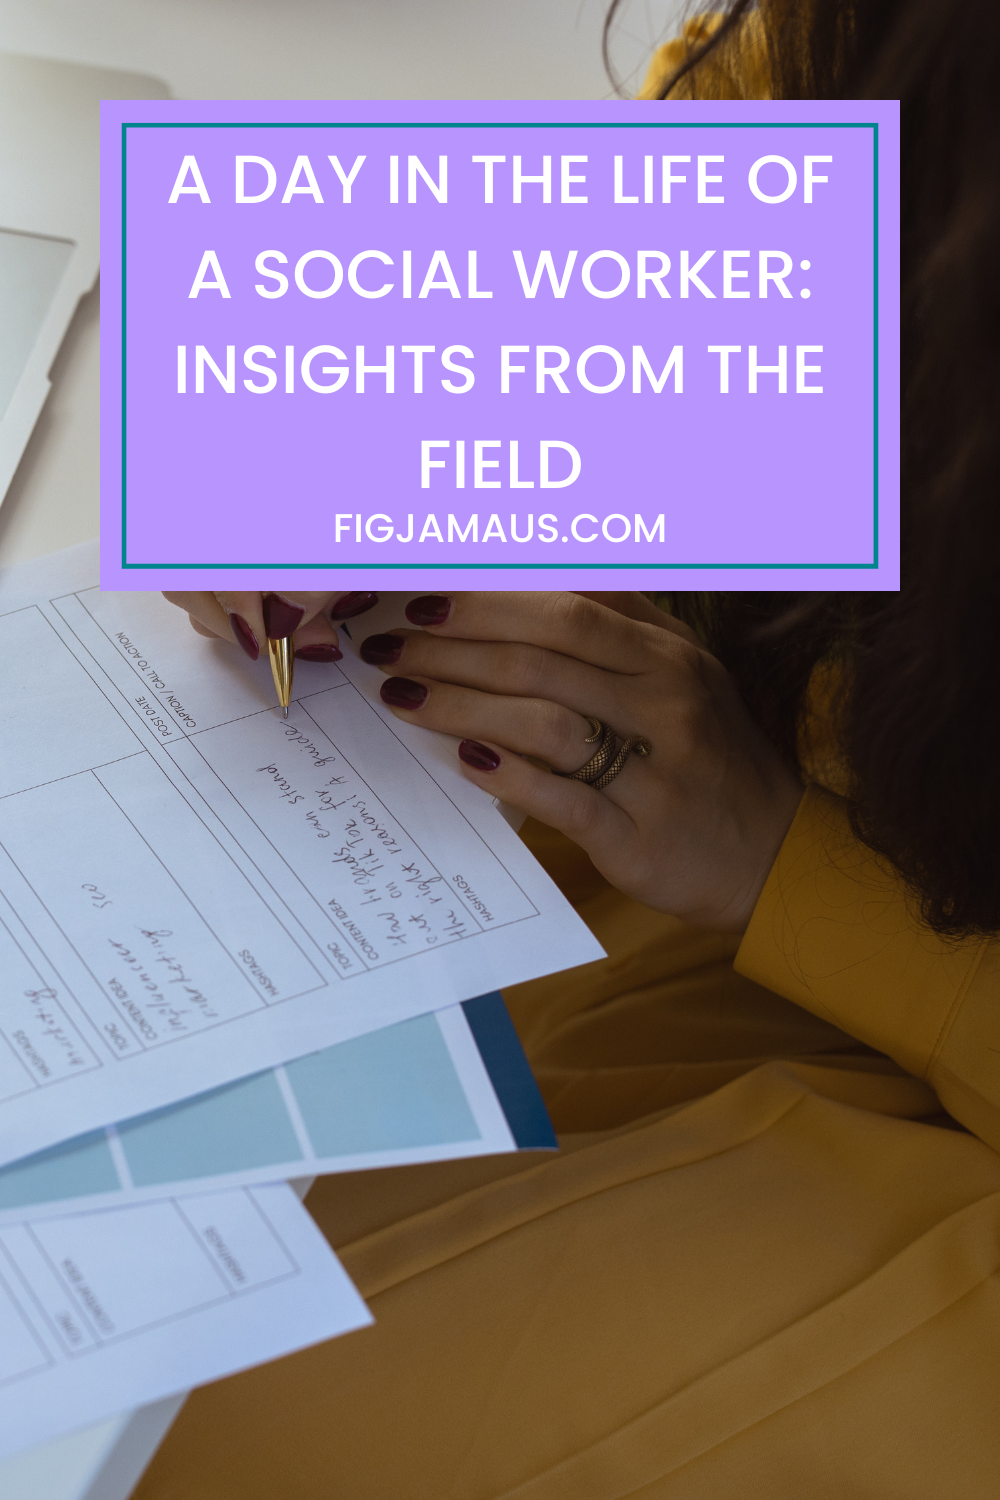 A day in the life of a social worker - insights from the field